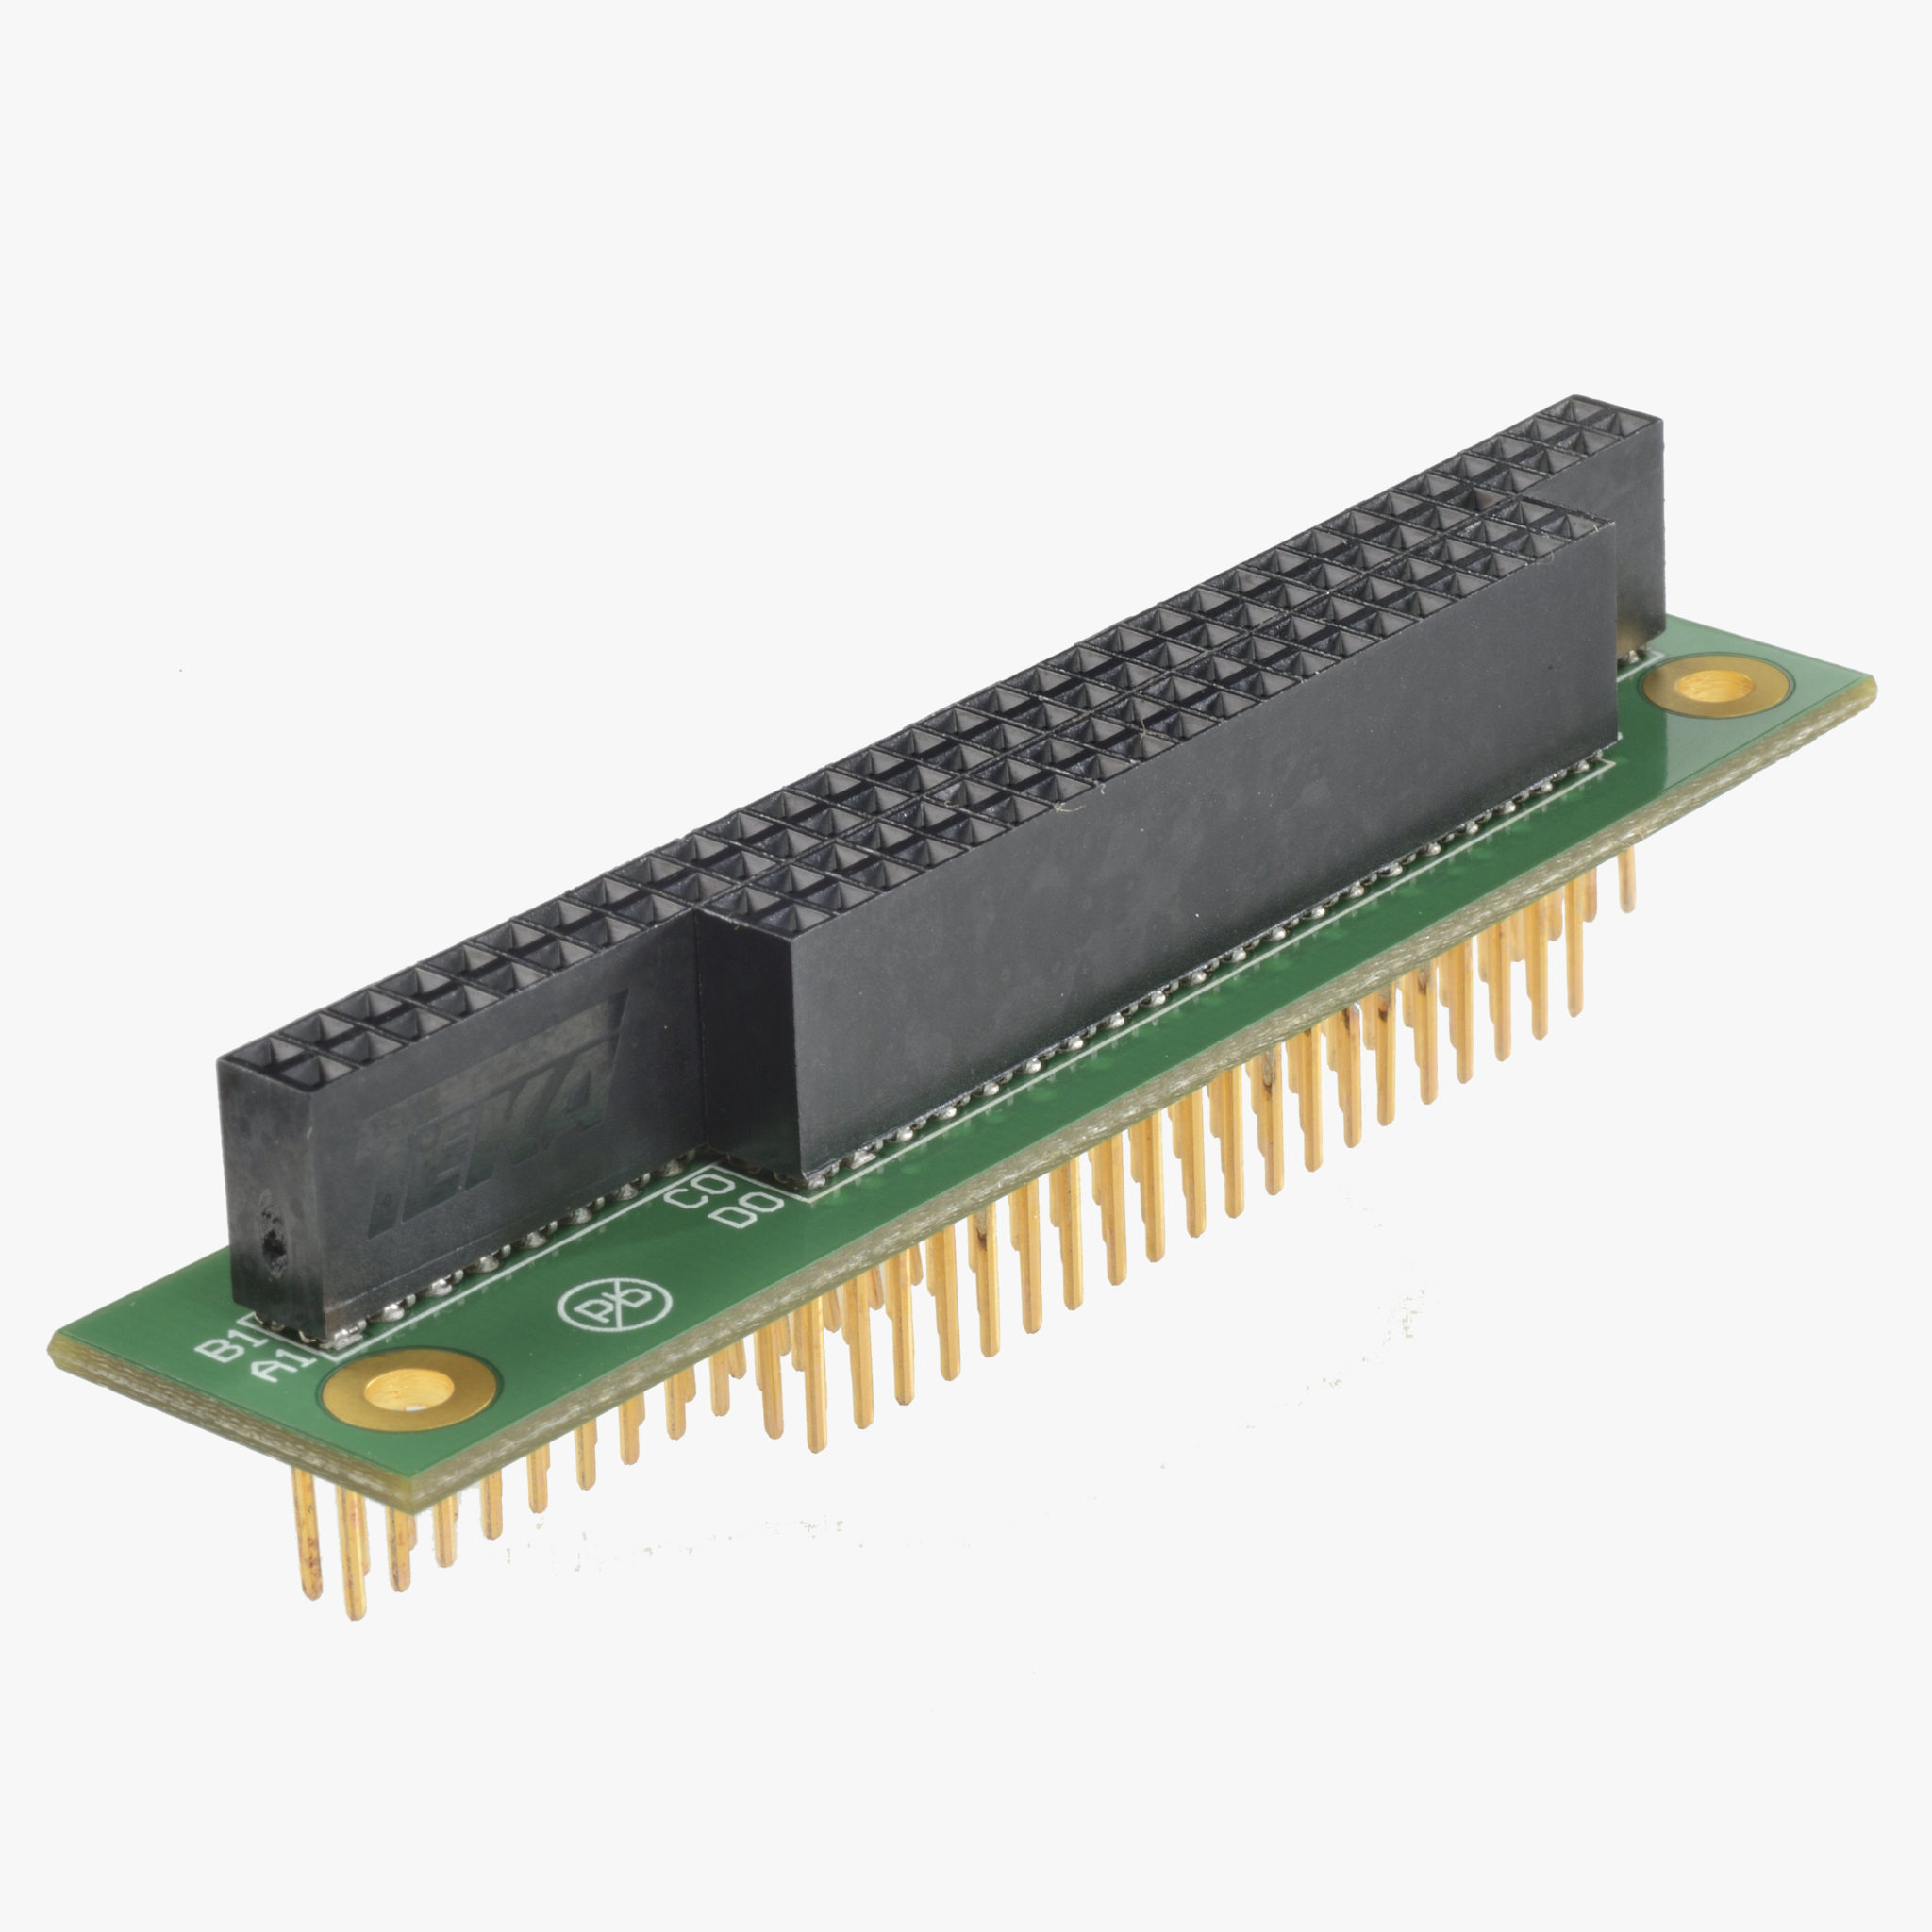 Spacer board with PC/104 Connector